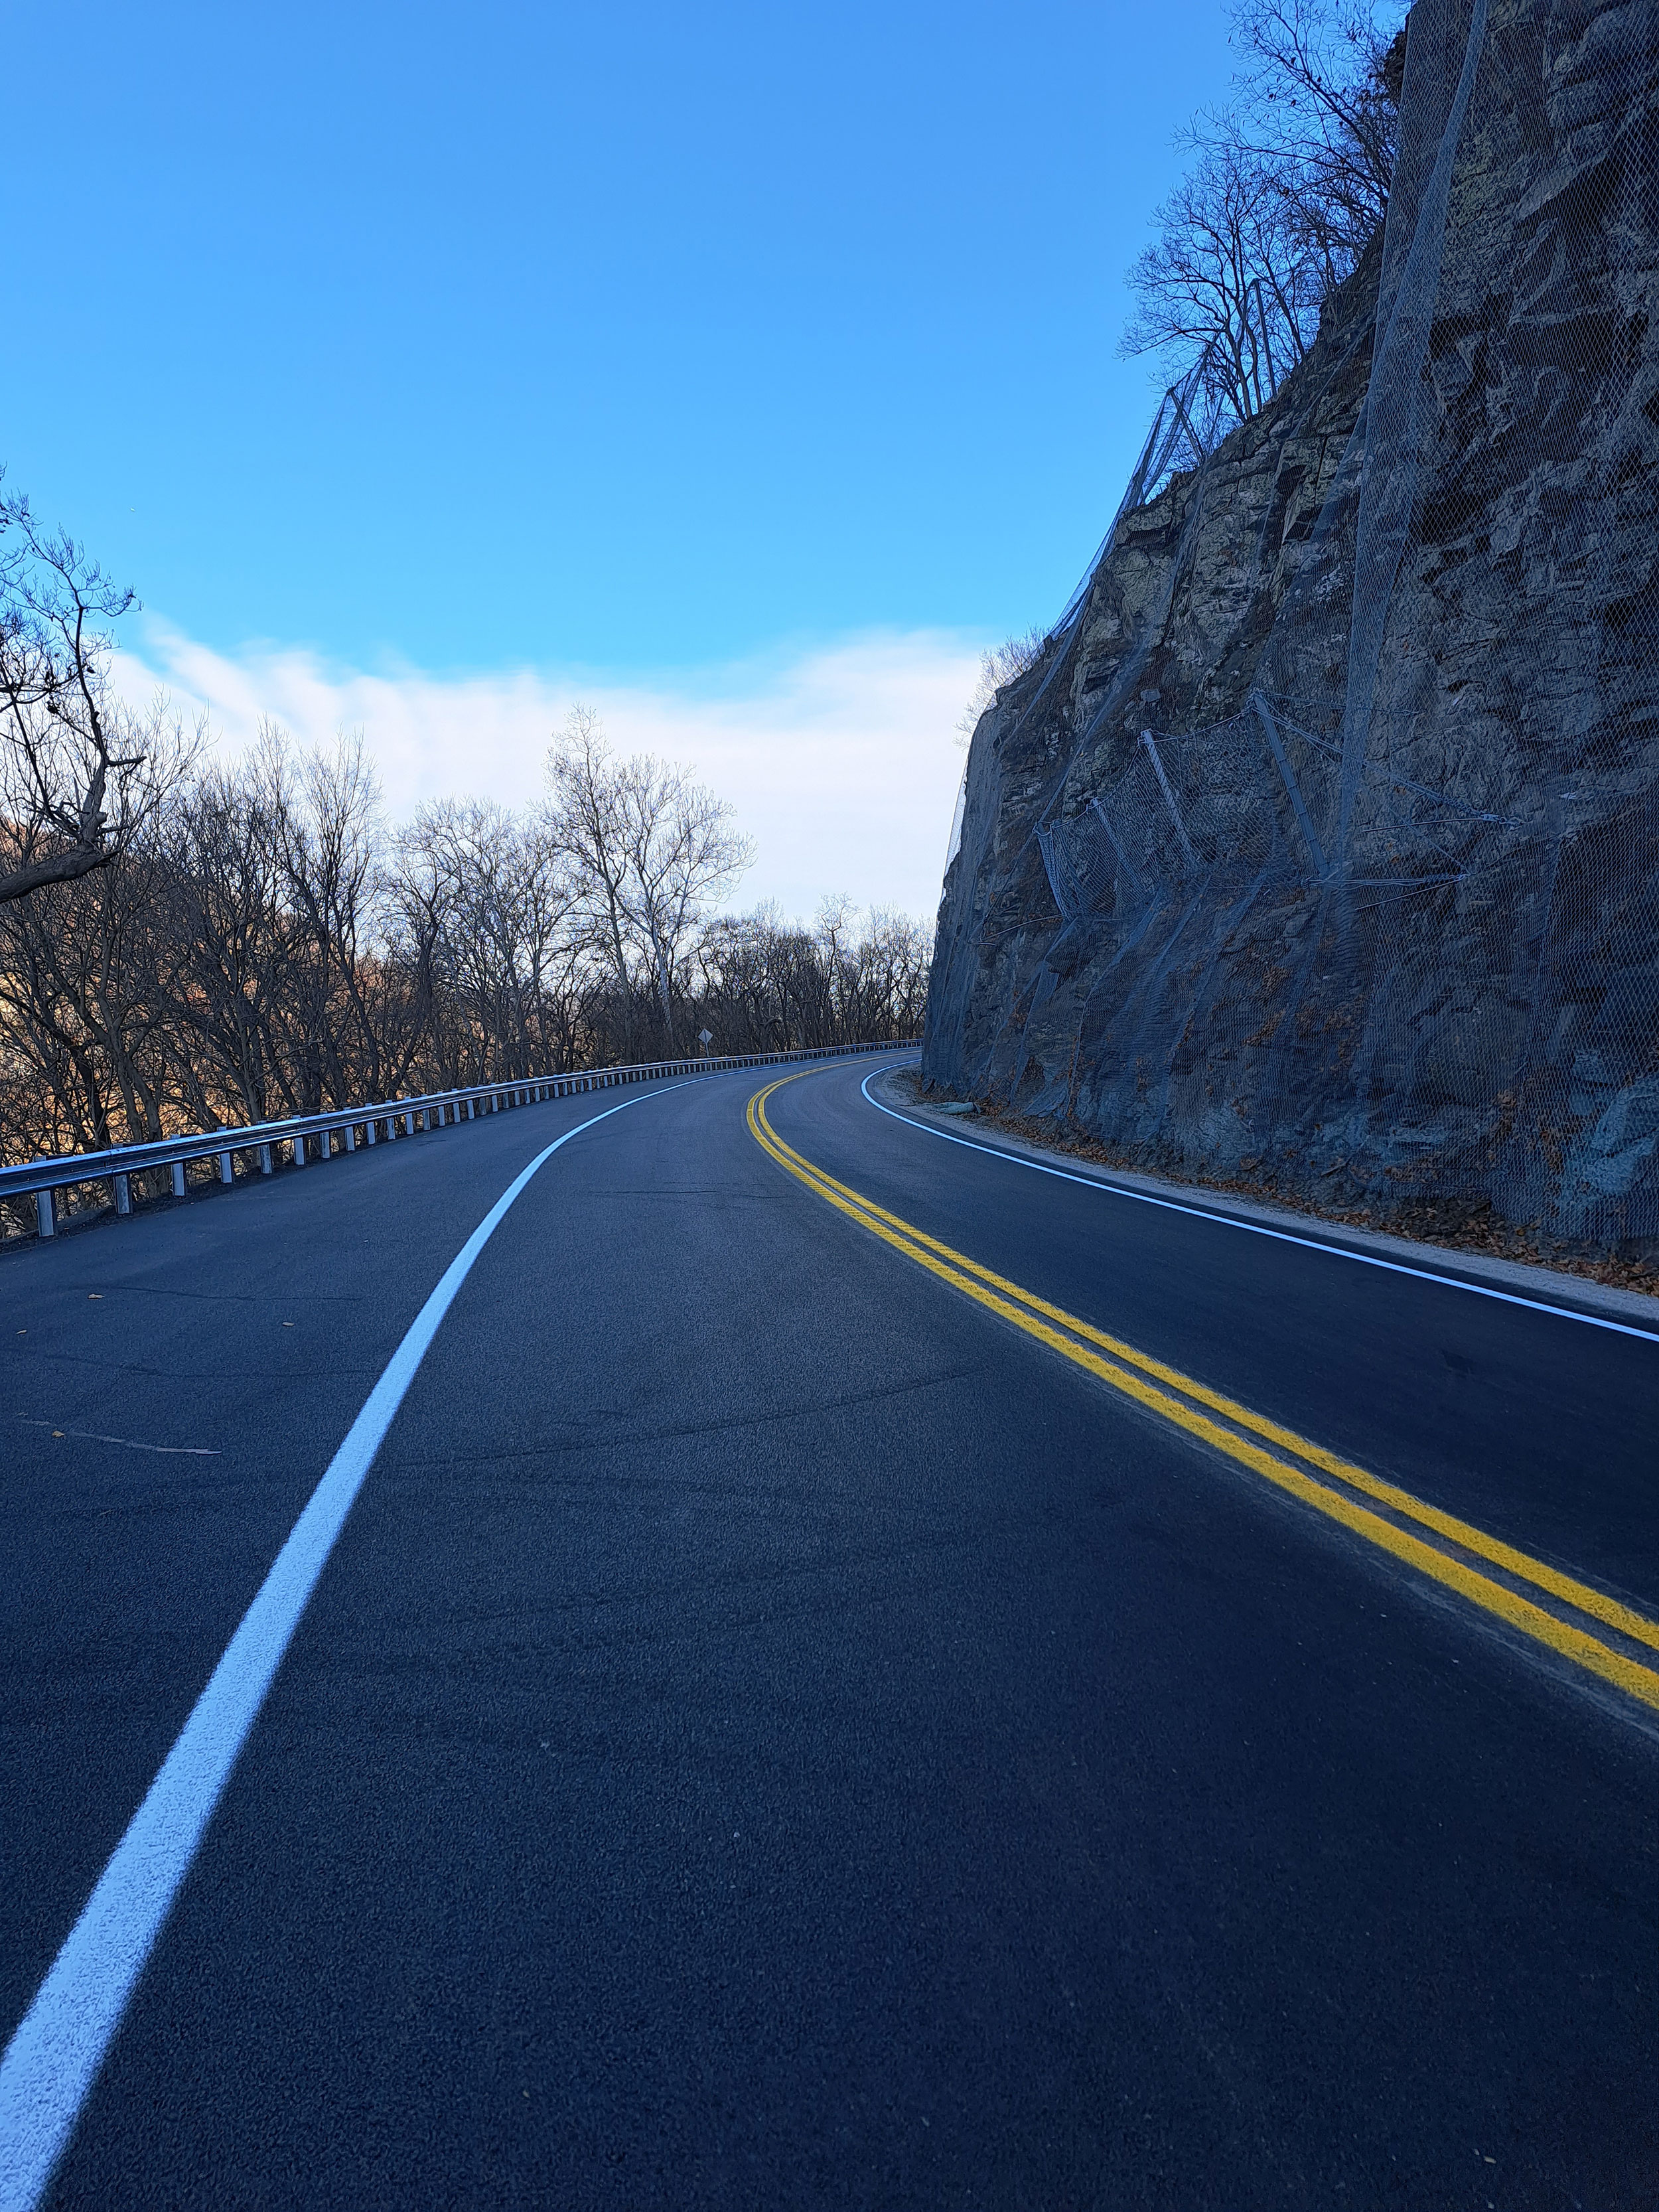 View of completed US 340 Rock Slide Remediation project.  Project includes new paved, paved shoulders, guardrail, and rumble strips.